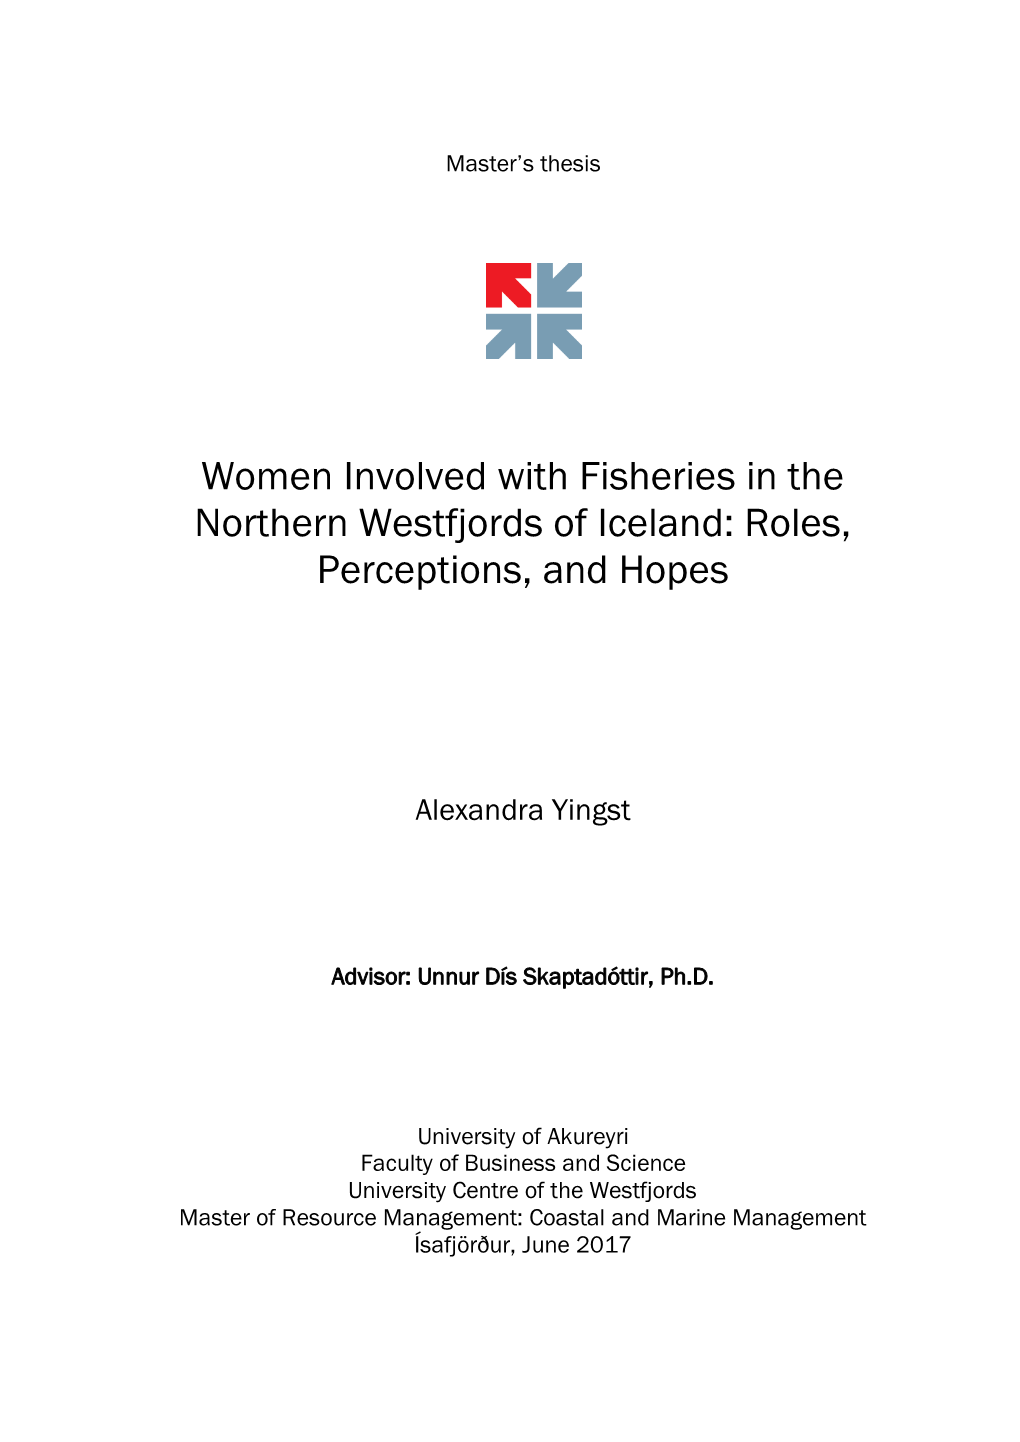 Women Involved with Fisheries in the Northern Westfjords of Iceland: Roles, Perceptions, and Hopes